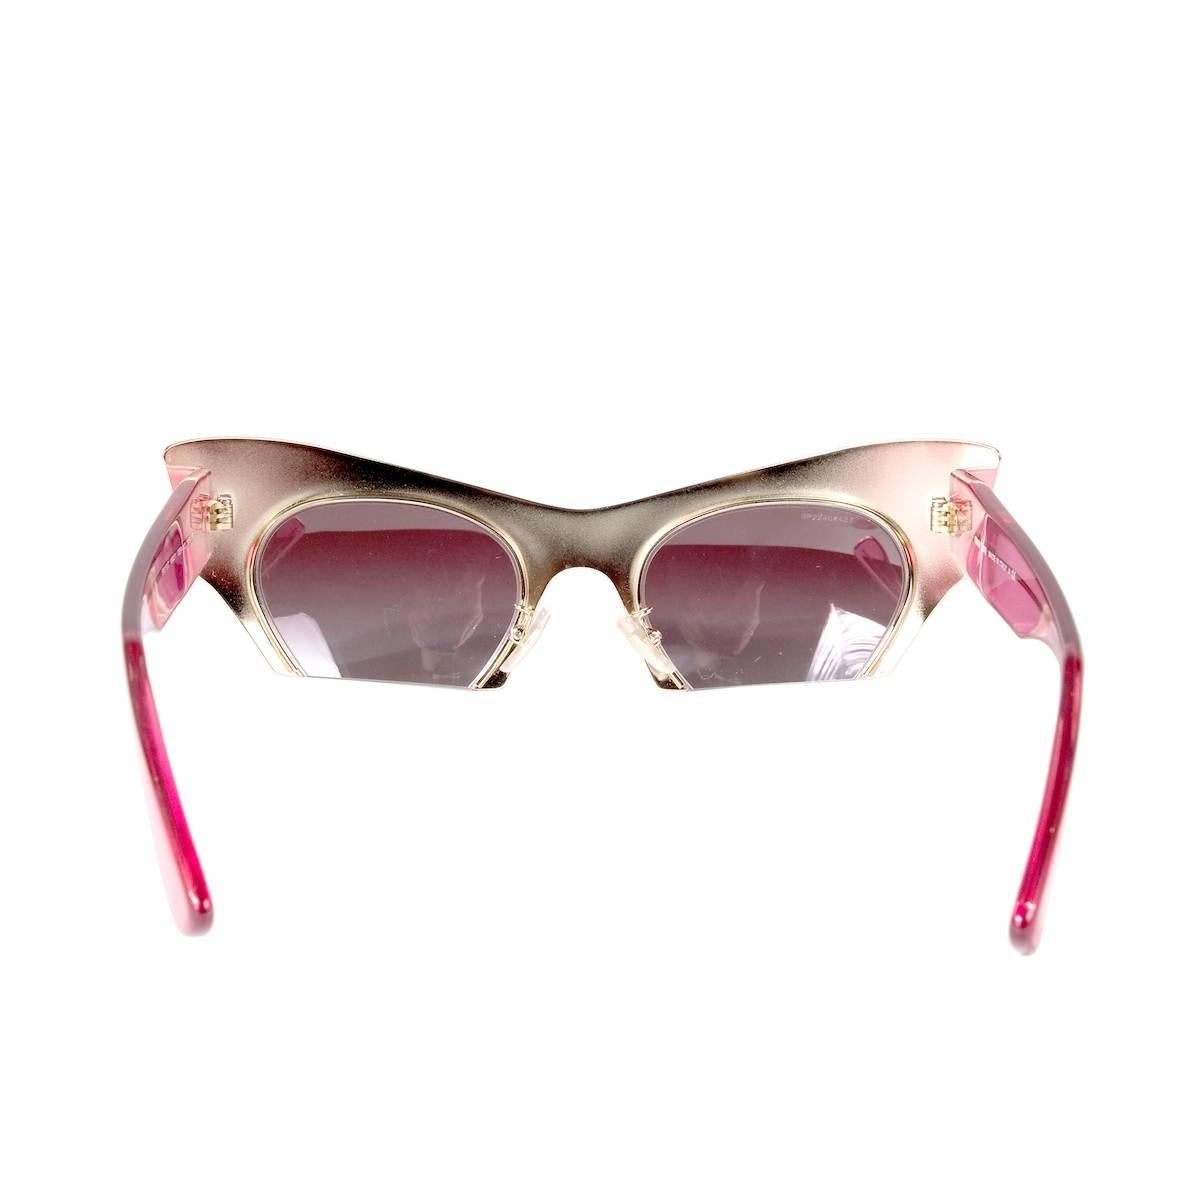 Cat eye sunglasses from Miu Miu. Pink bars with silver frame and lenses. Case included.

14.75cm frame width
4.5cm frame height
14cm bar length